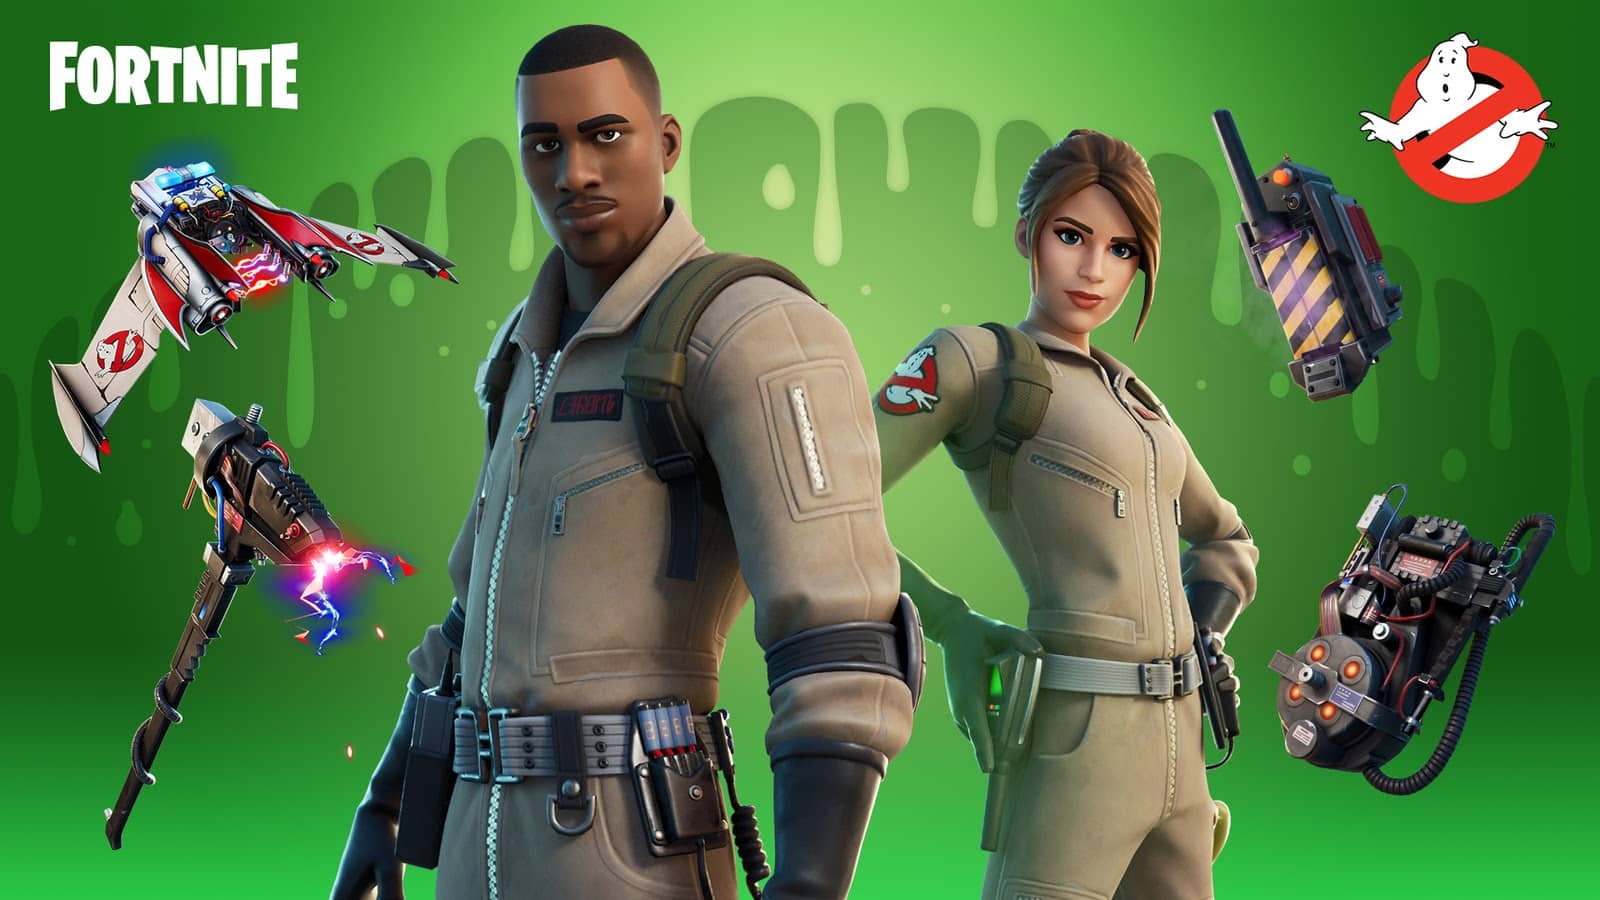 The Ghostbusters in Fortnite